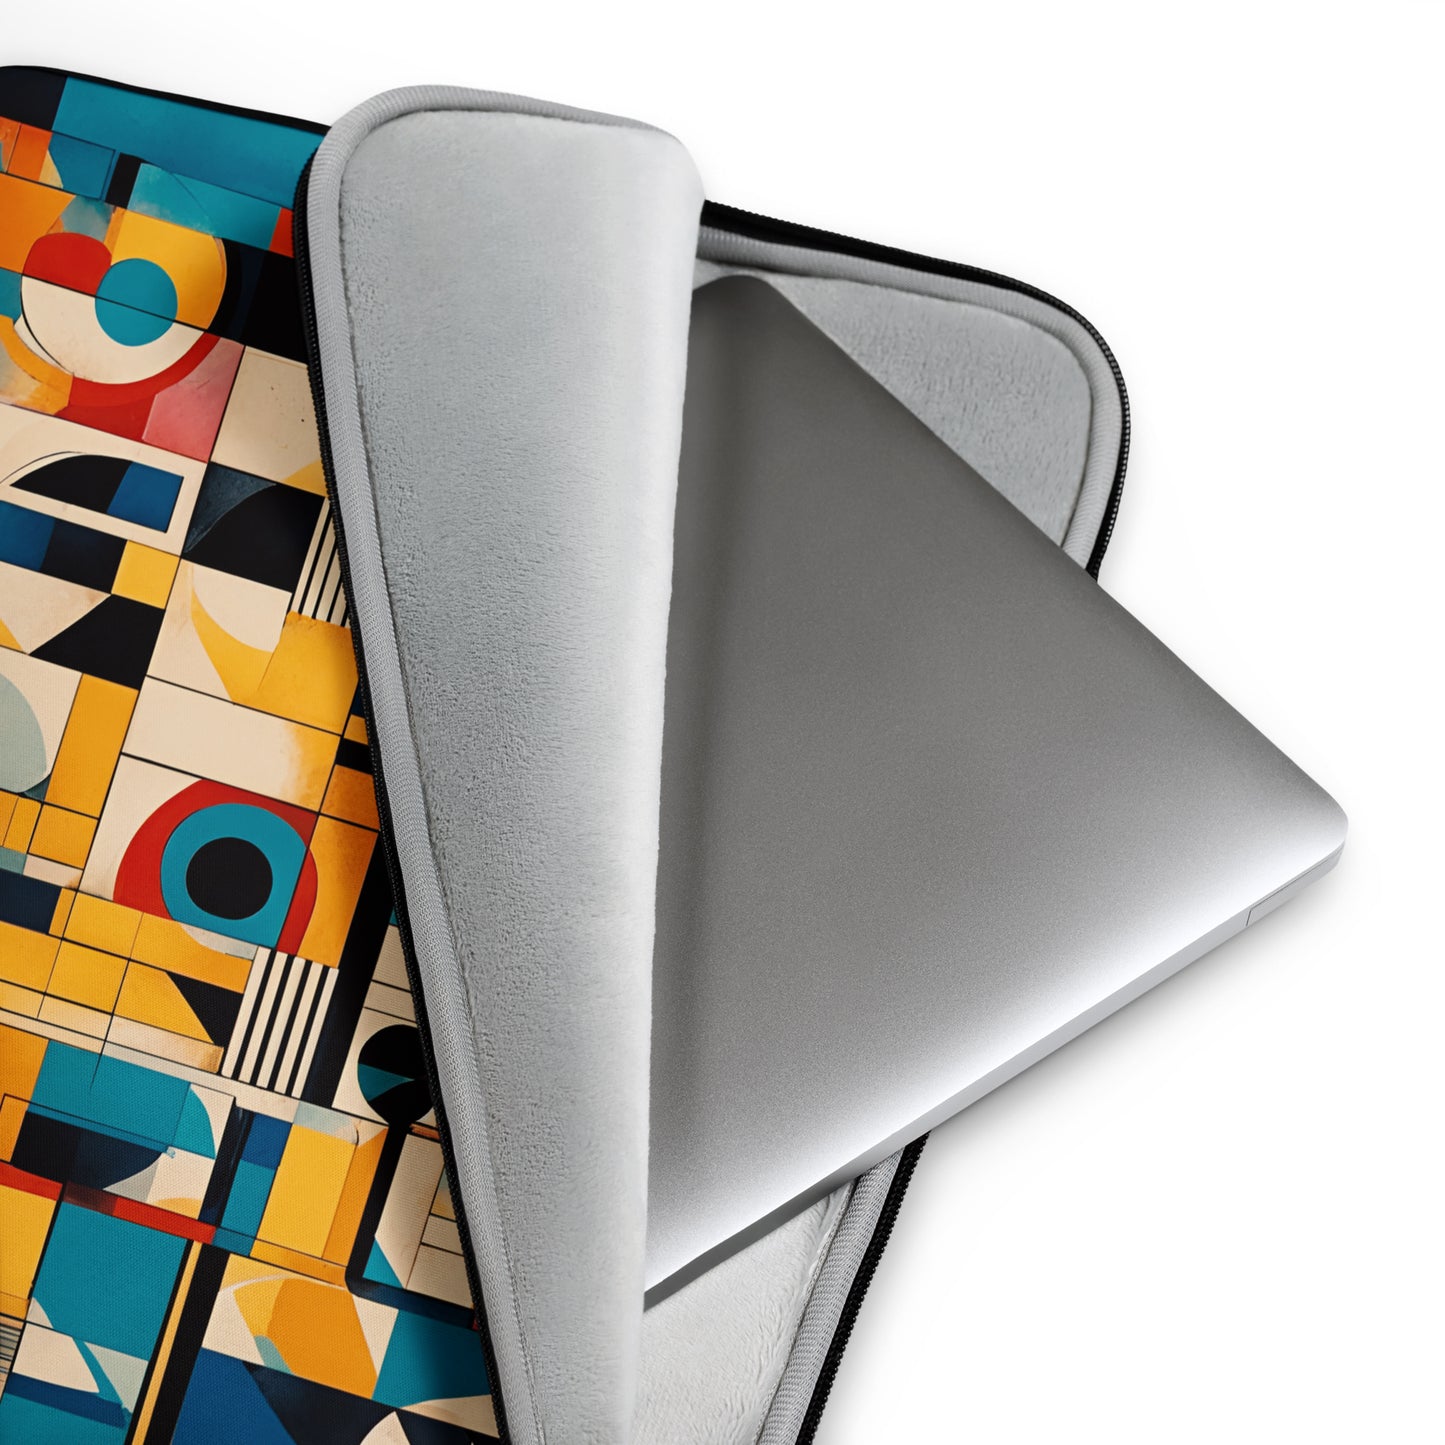 Techie and Computer Gifts, Bold Mid Century Modern Wall Art Print Laptop sleeve